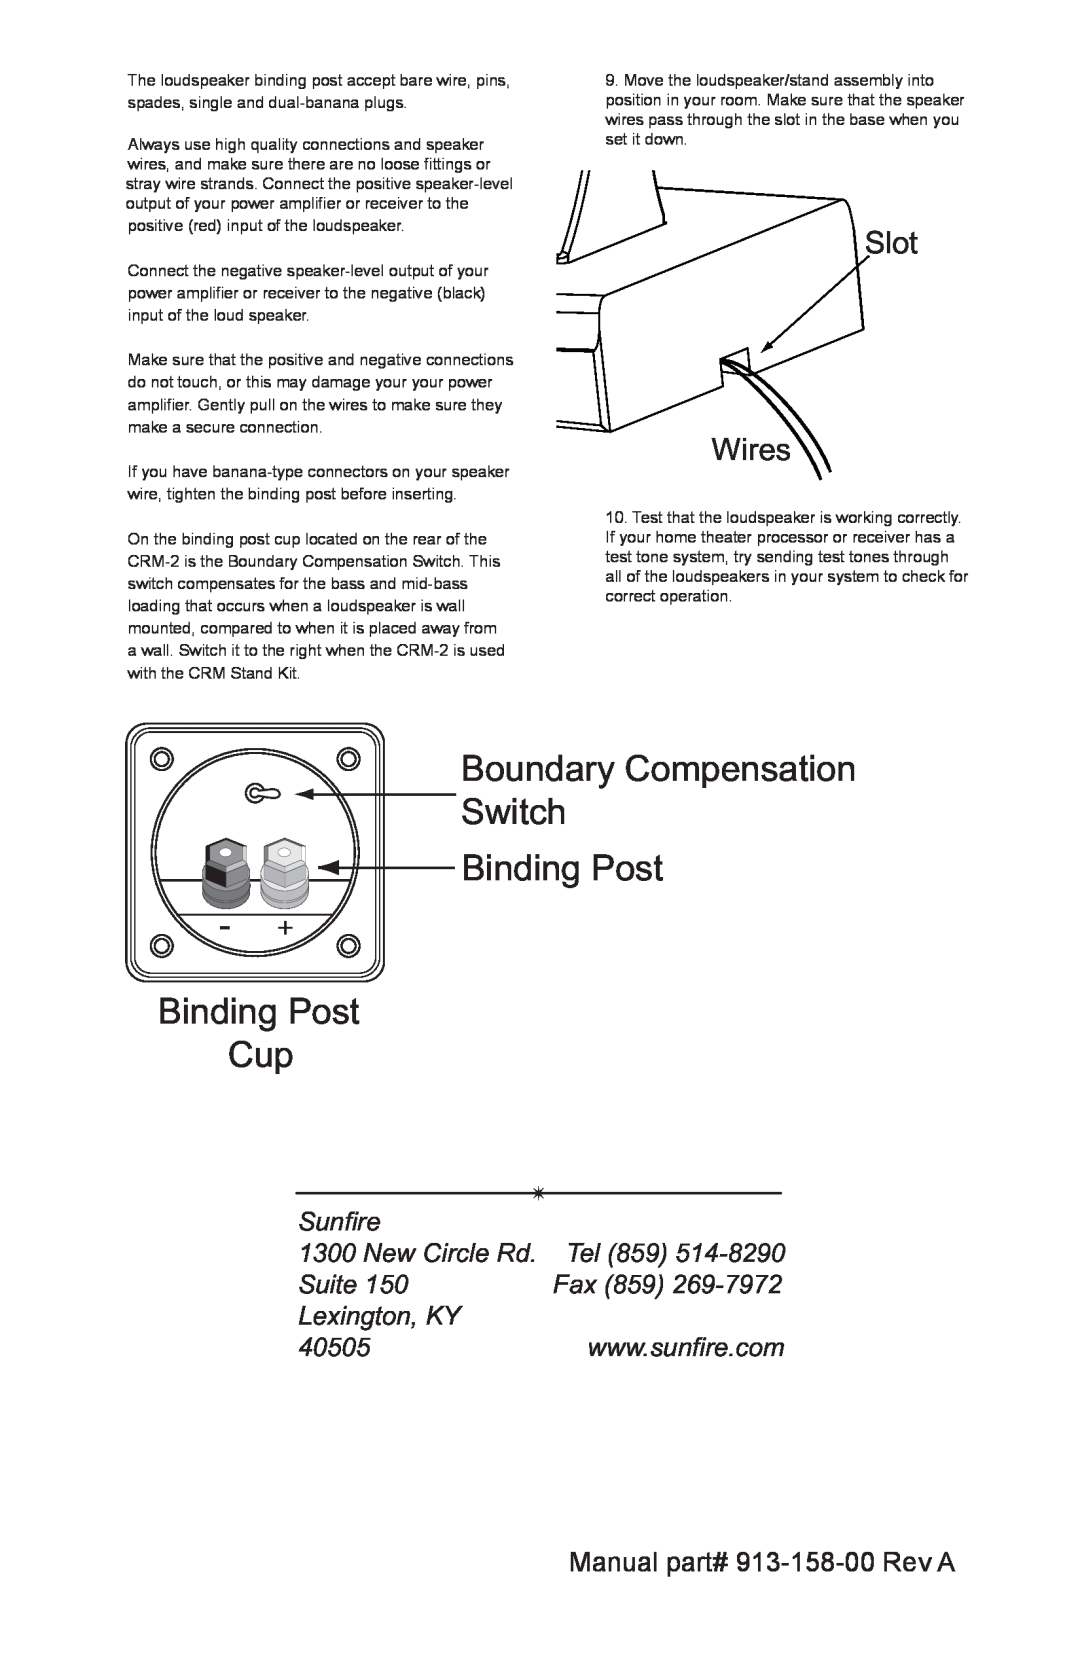 Sunfire Speaker Boundary Compensation Switch Binding Post, Binding Post Cup, Slot Wires, Sunfire 1300 New Circle Rd. Tel 